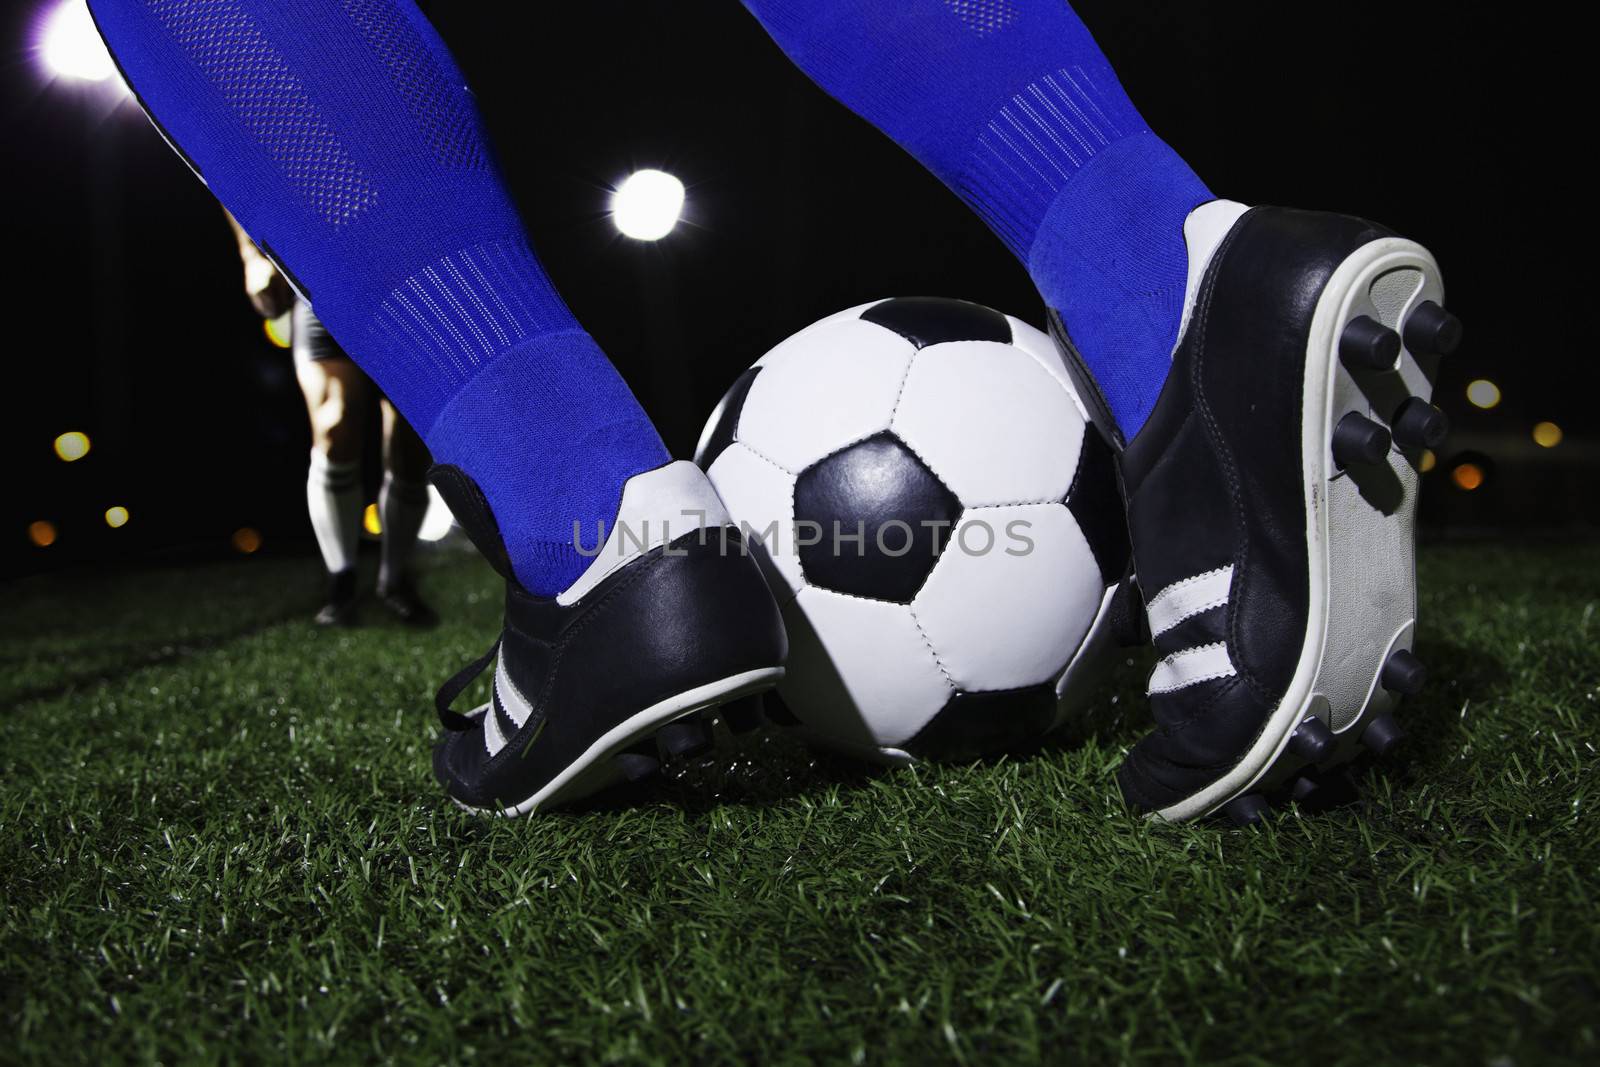 Close up of feet kicking the soccer ball, night time in the stadium